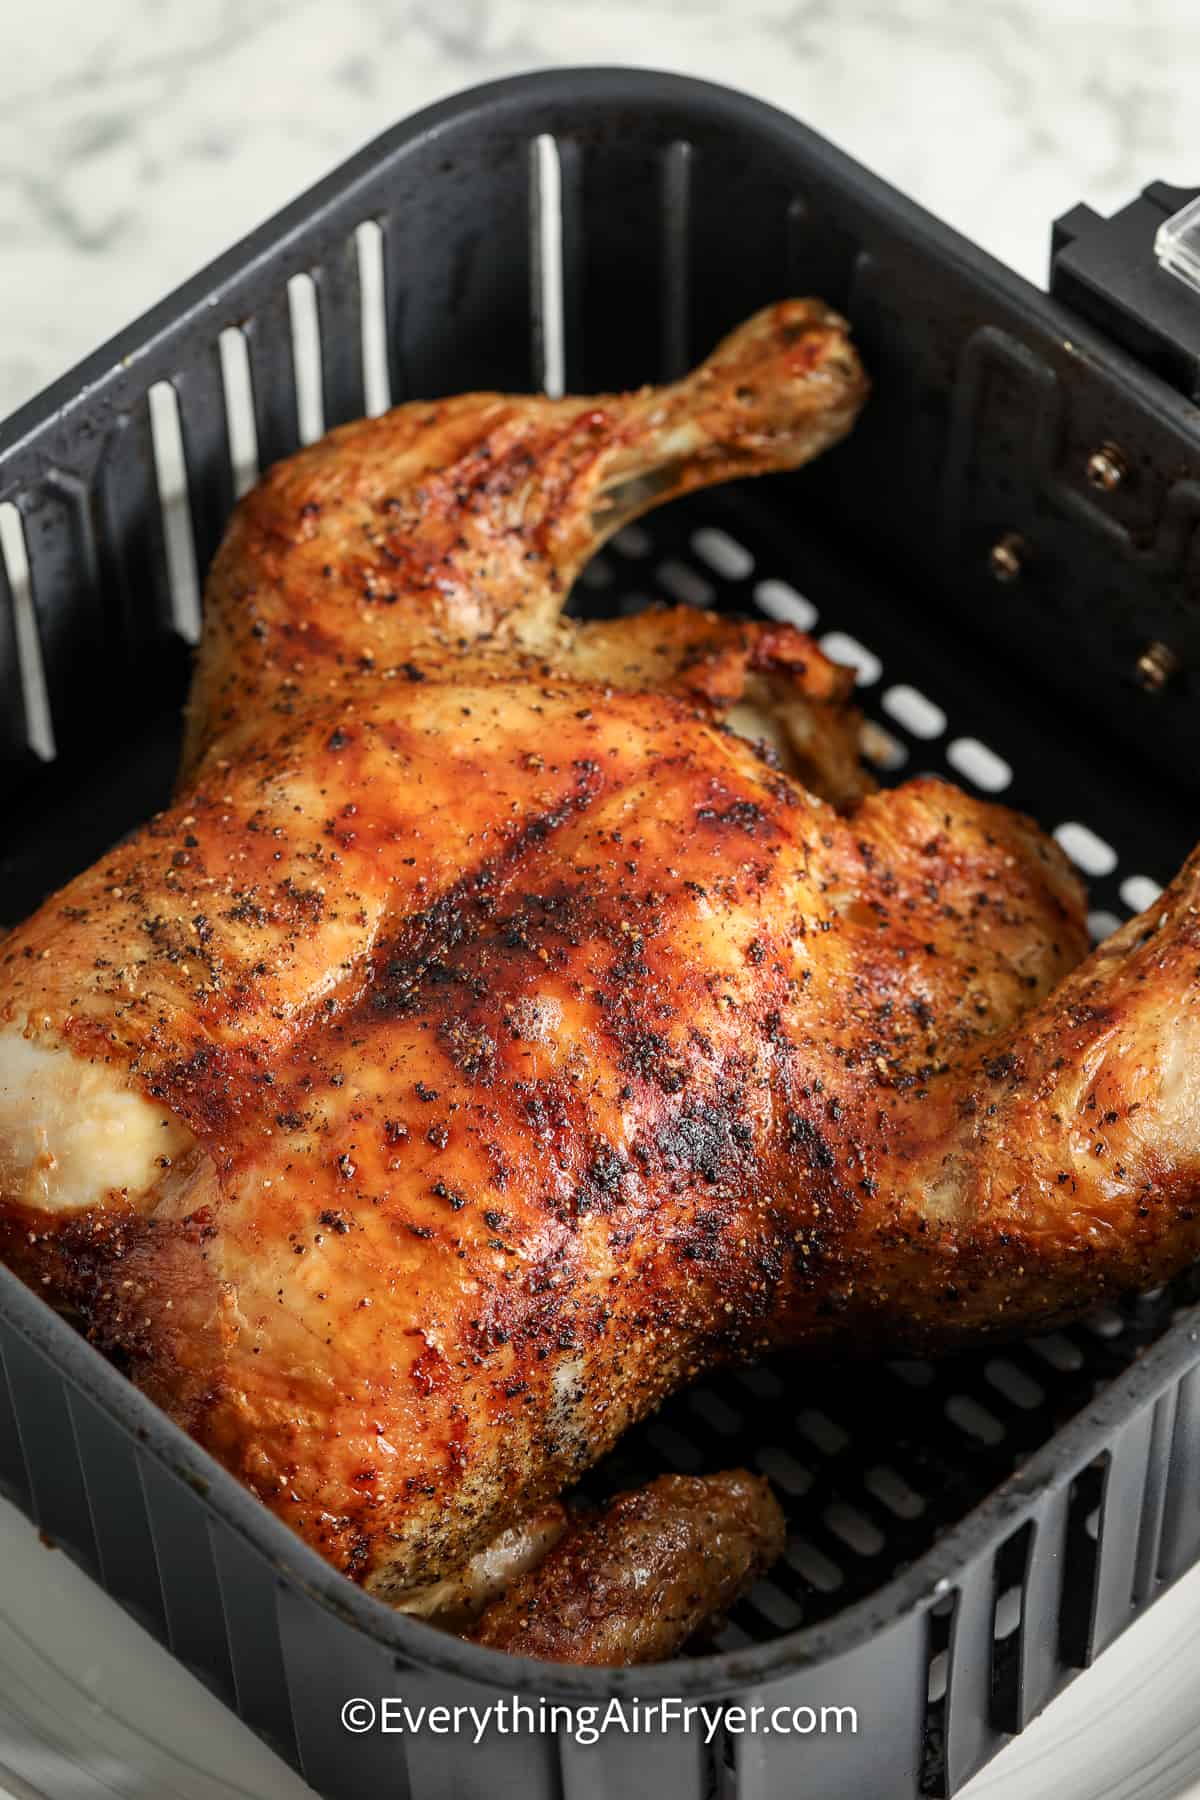 Cooked whole chicken in an air fryer basket